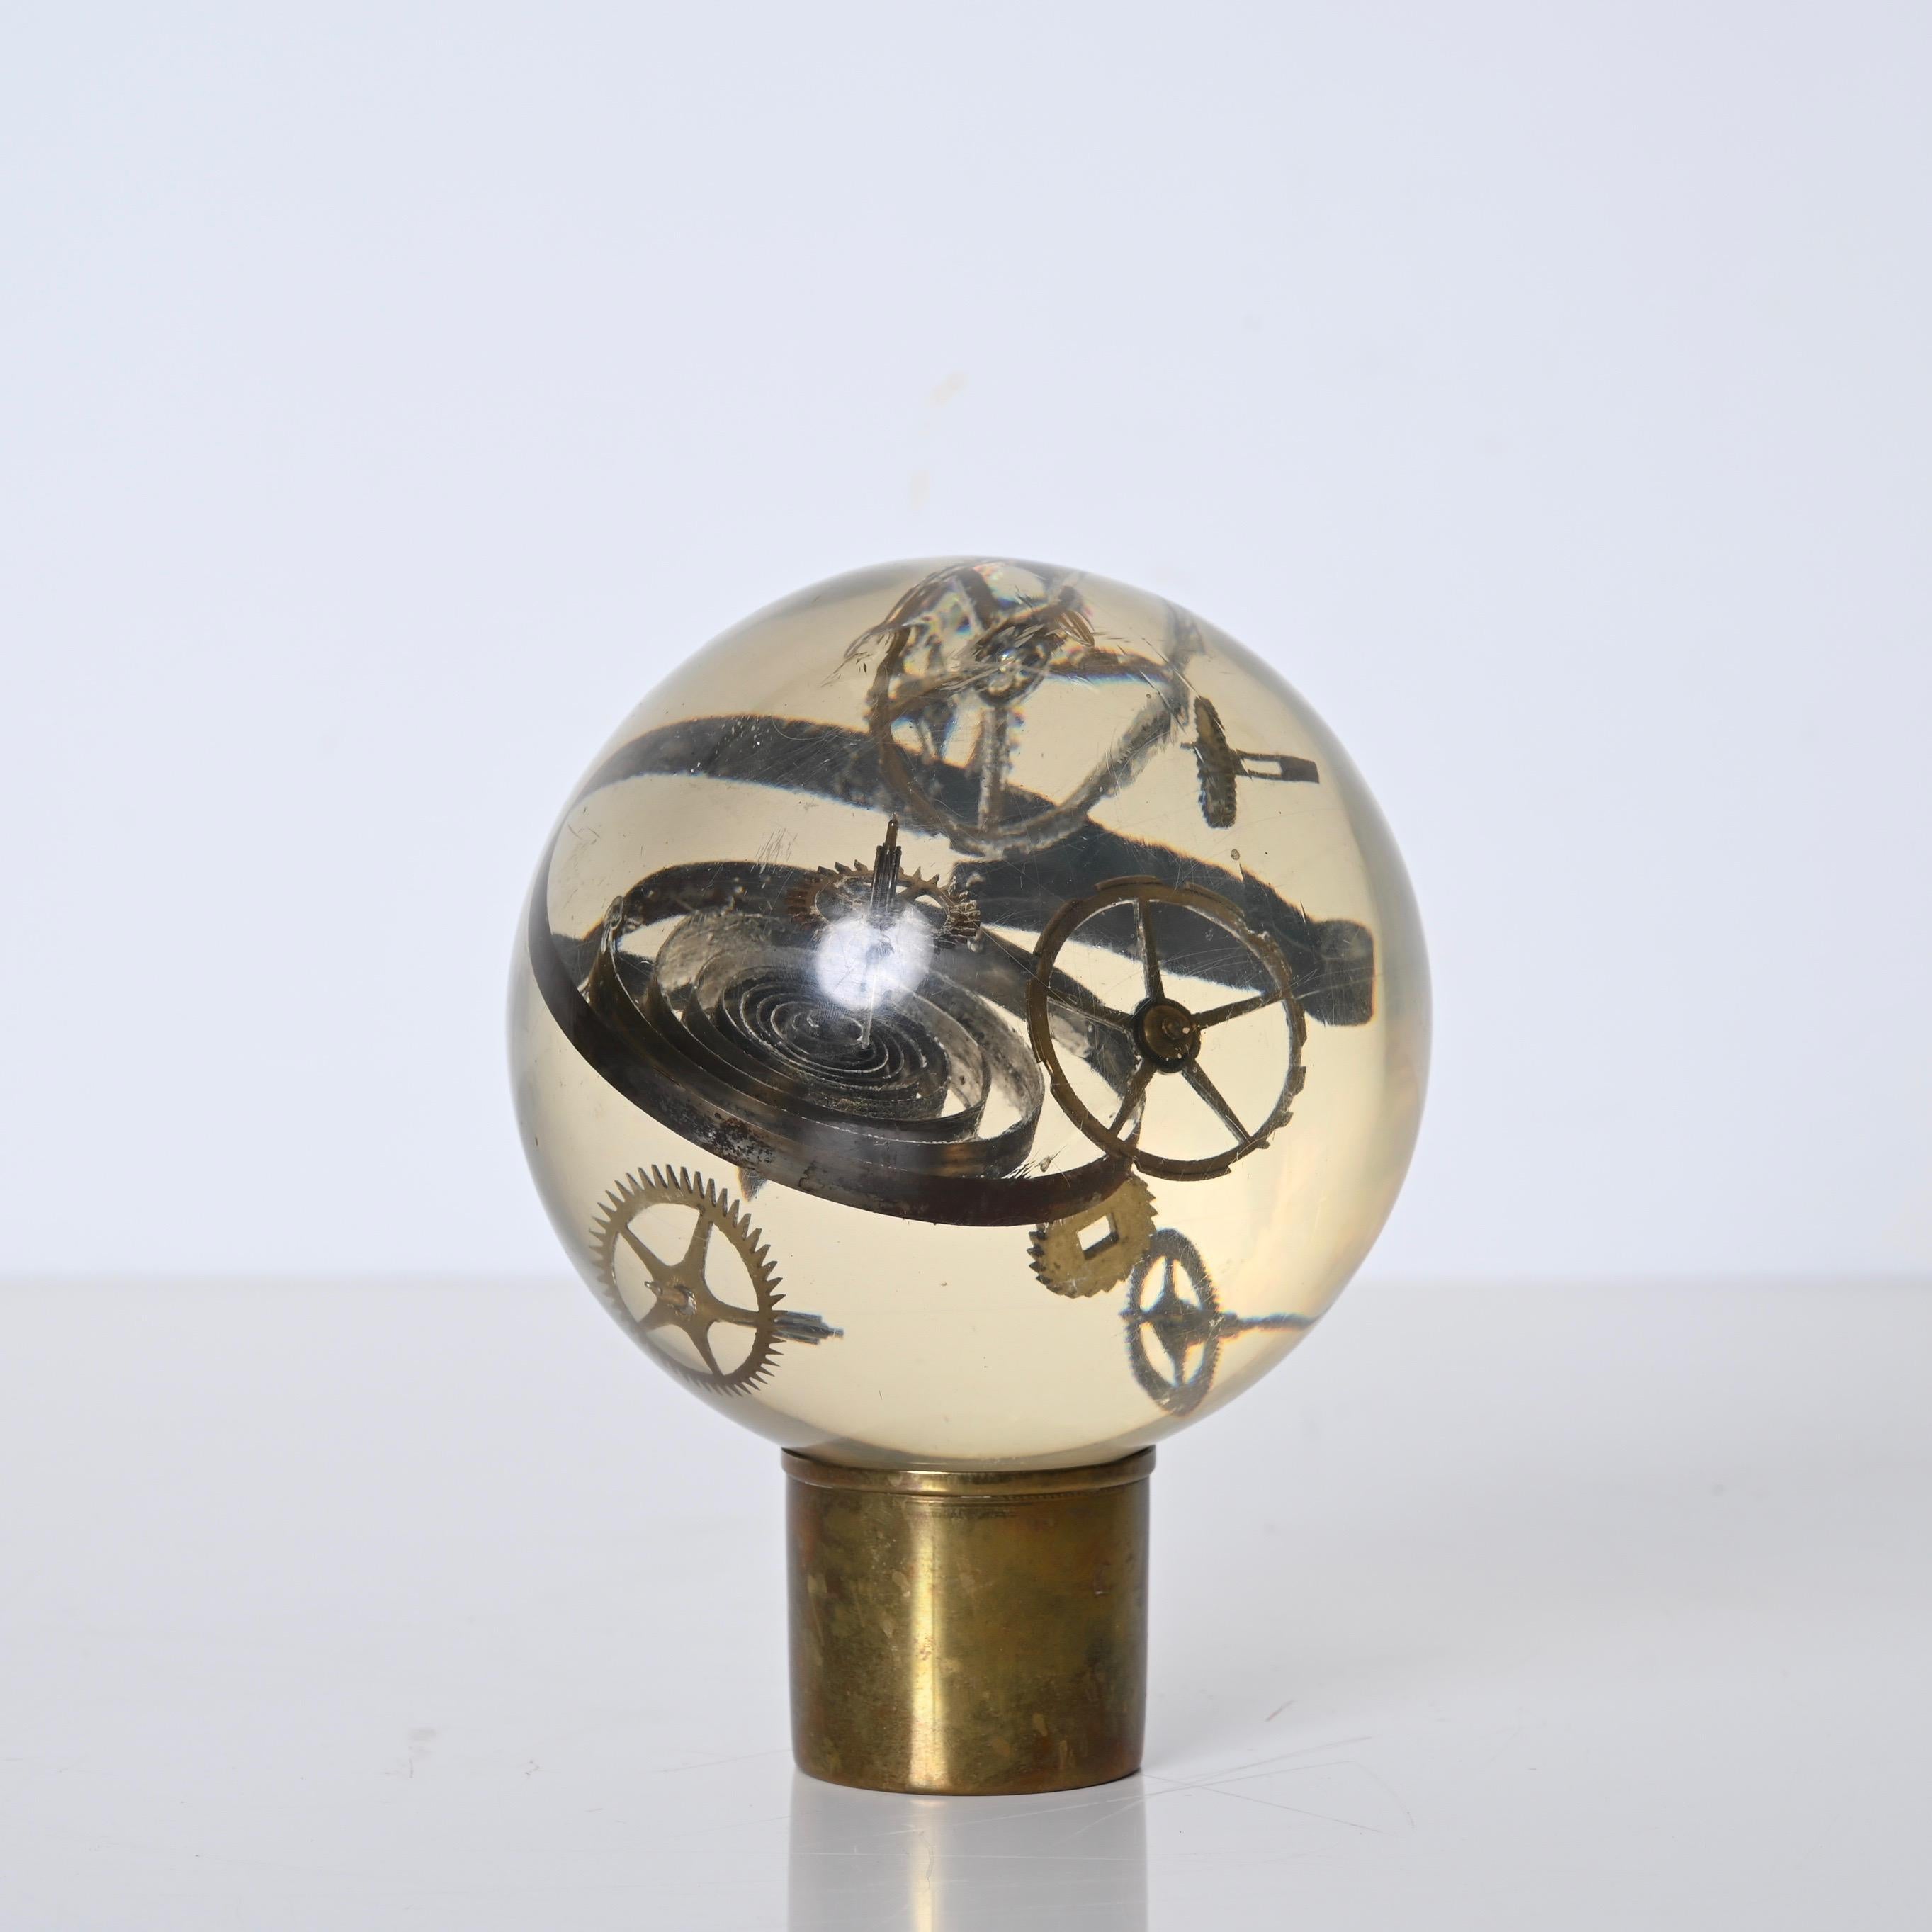 20th Century Pierre Giraudon Resin Exploded Clock Globe Sculpture, France 1970s For Sale